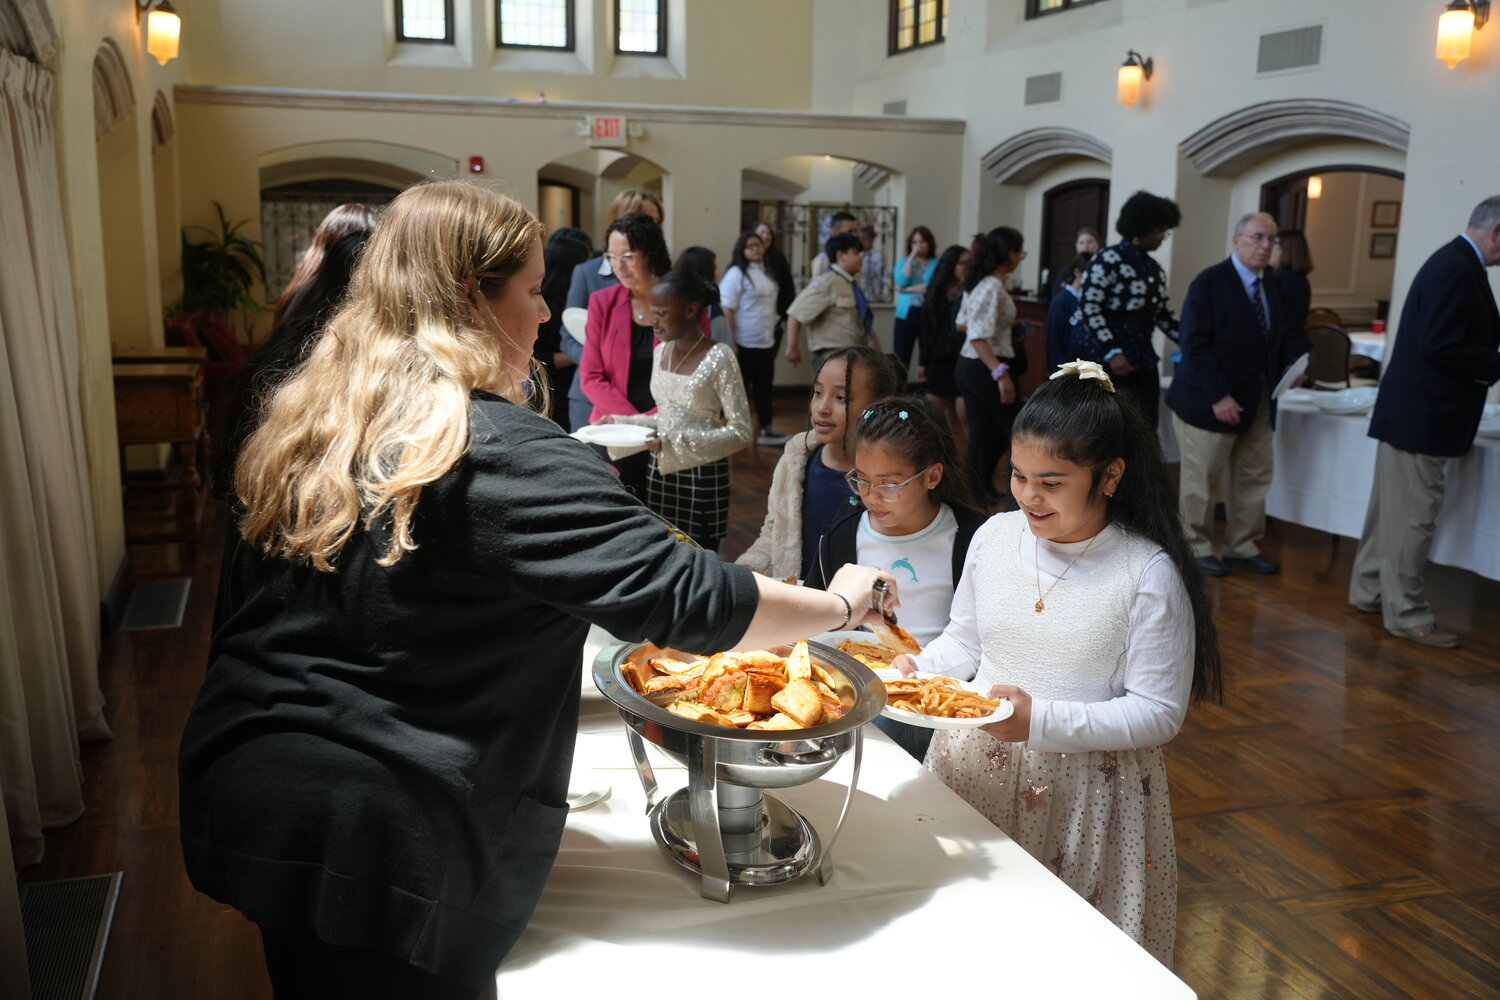 Students from the 11 schools that participated in the Nassau County Bar Association Mentor Program got to enjoy a special luncheon on May 25.